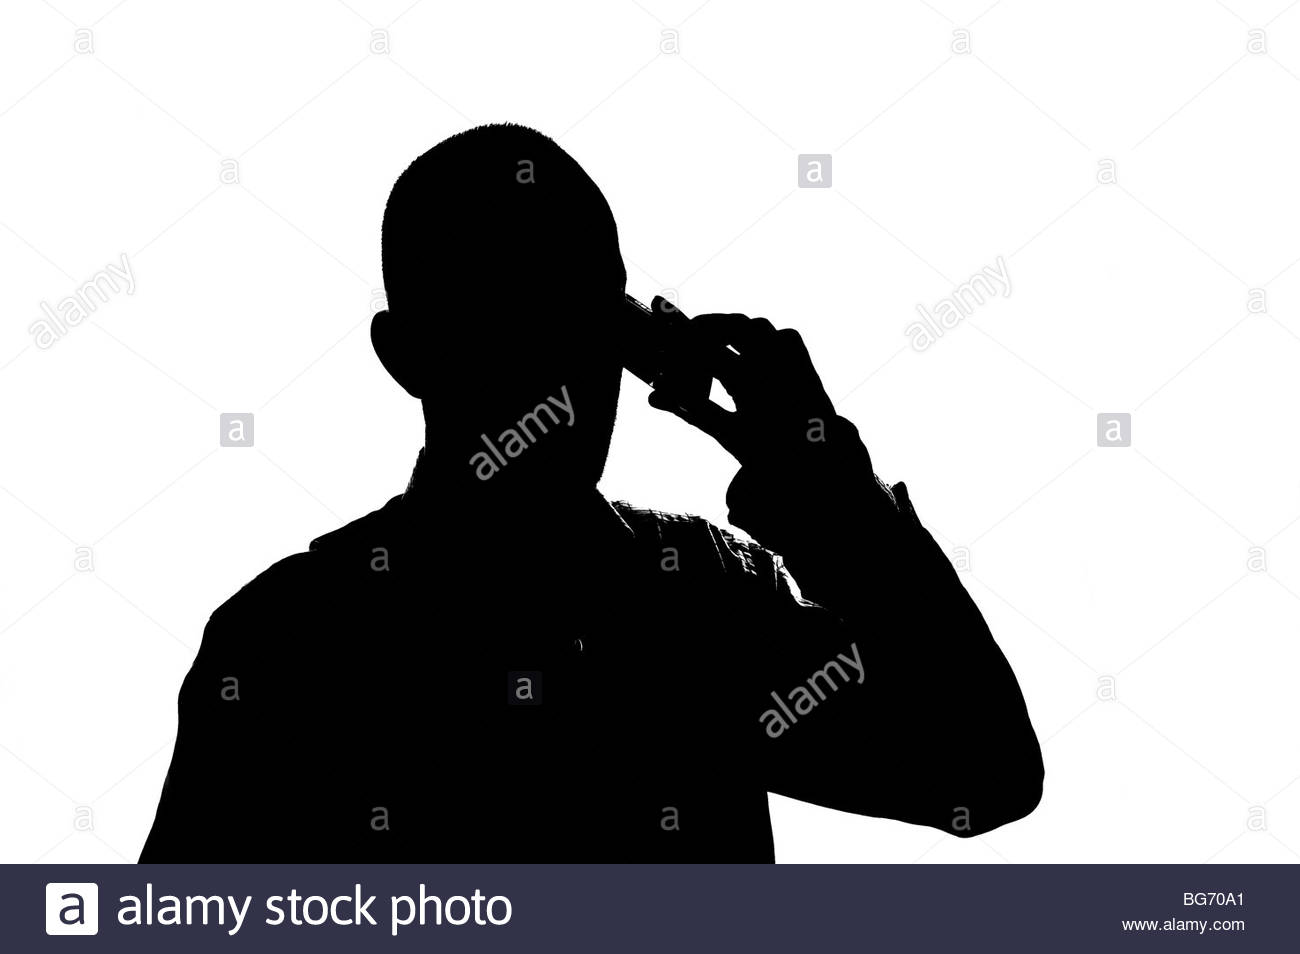 Silhoutted man on mobile phone Stock Photo